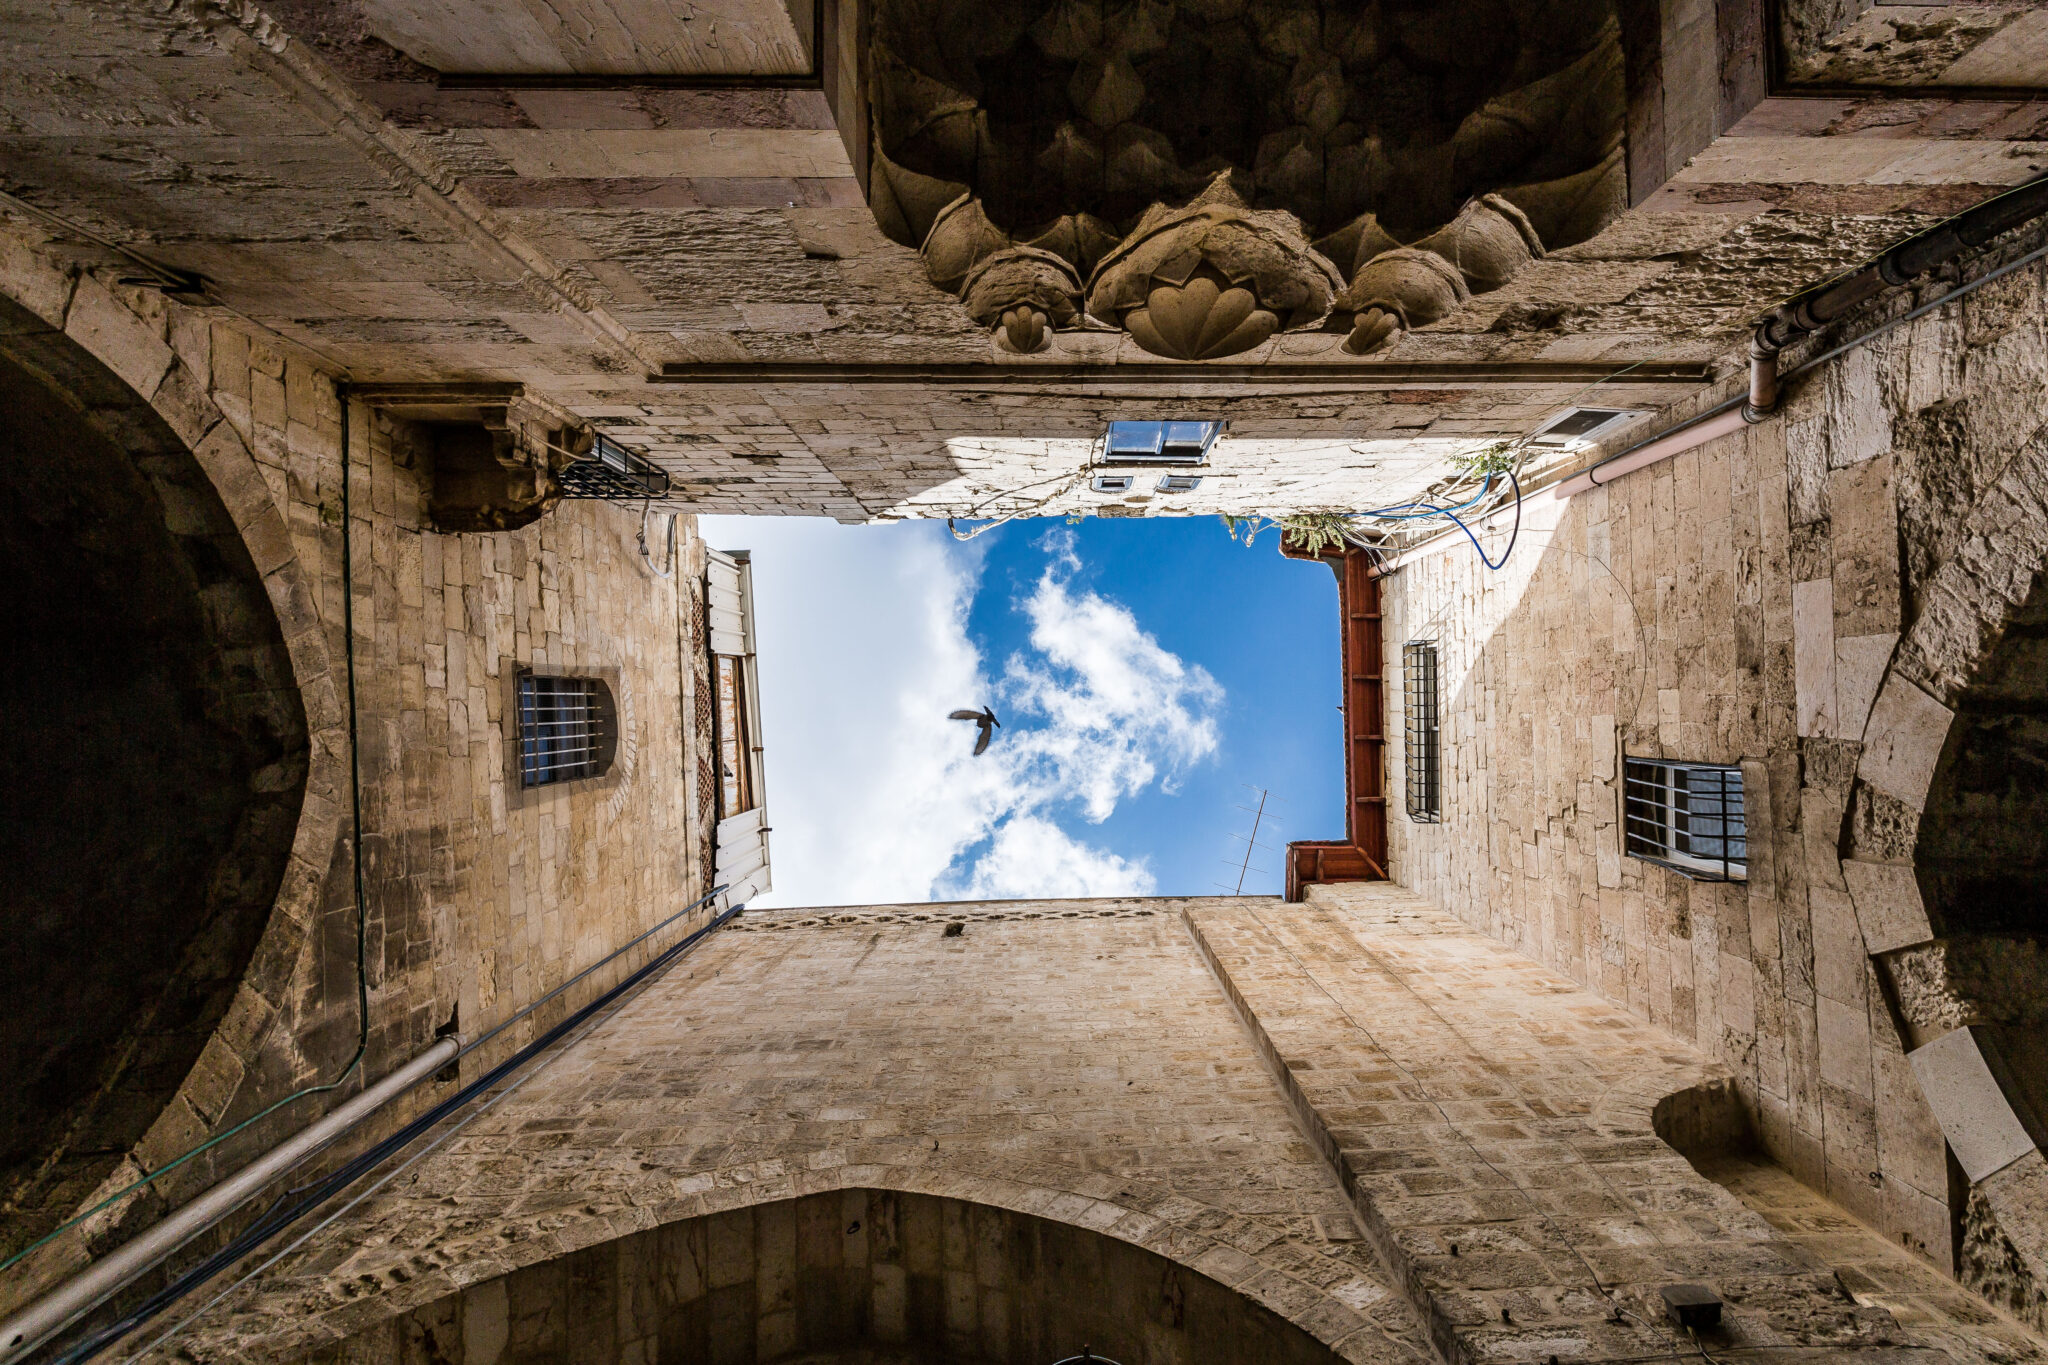 looking up at the sky in the old city of Jerusalem